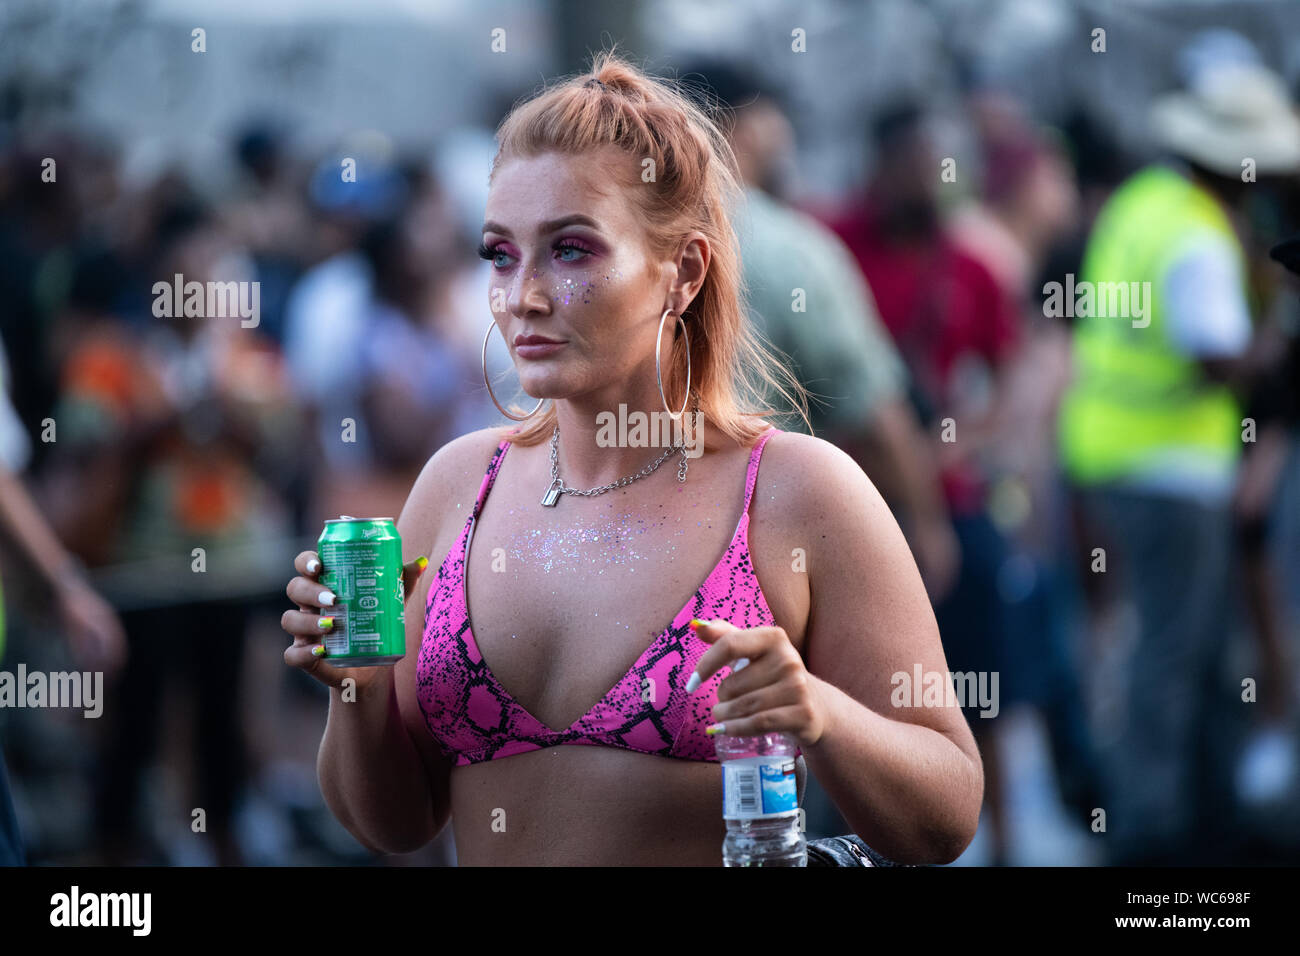 https://c8.alamy.com/comp/WC698F/a-white-woman-wearing-a-hot-pink-bra-holding-a-can-of-sprite-at-notting-hill-carnival-WC698F.jpg